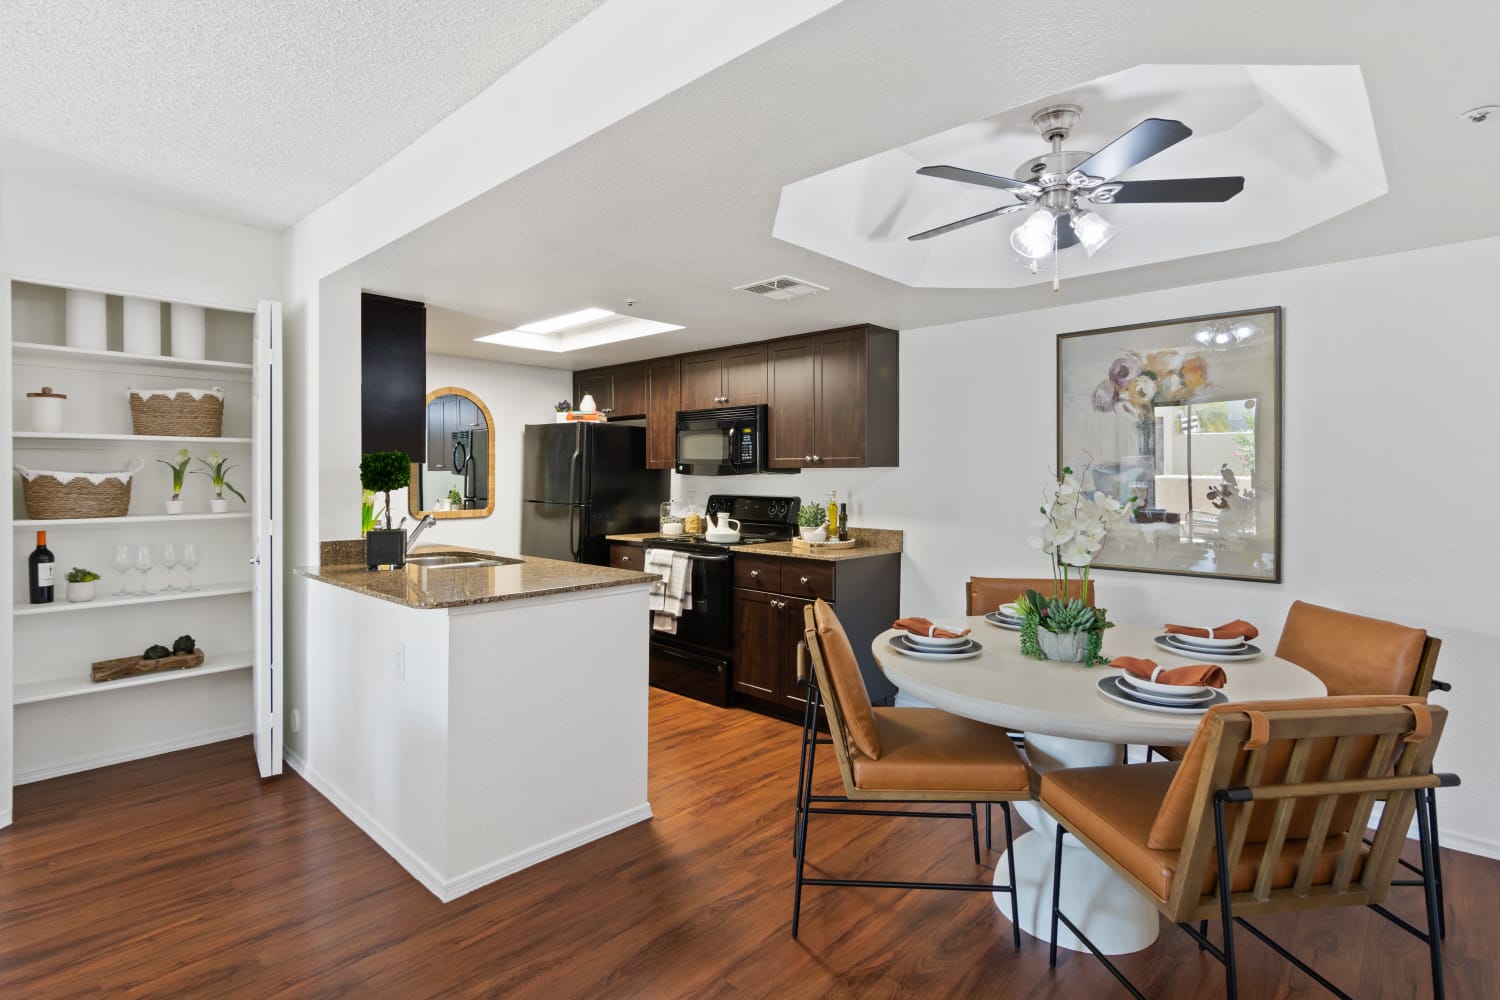 Fully-equipped kitchen with white cabinetry and wood-style floors at Casa Santa Fe Apartments in Scottsdale, Arizona